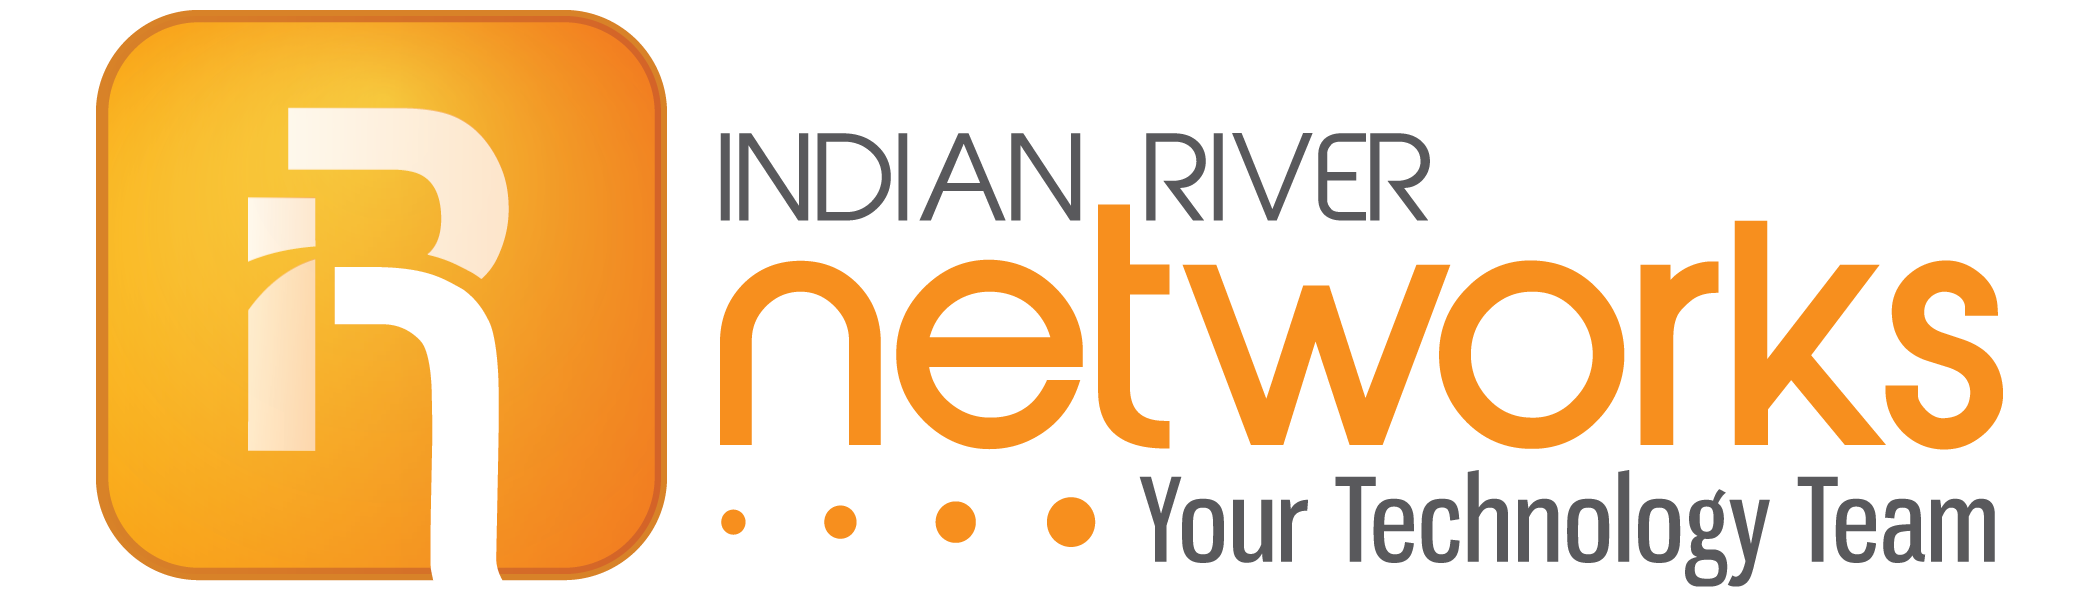 Indian River Networks : your Technology Team